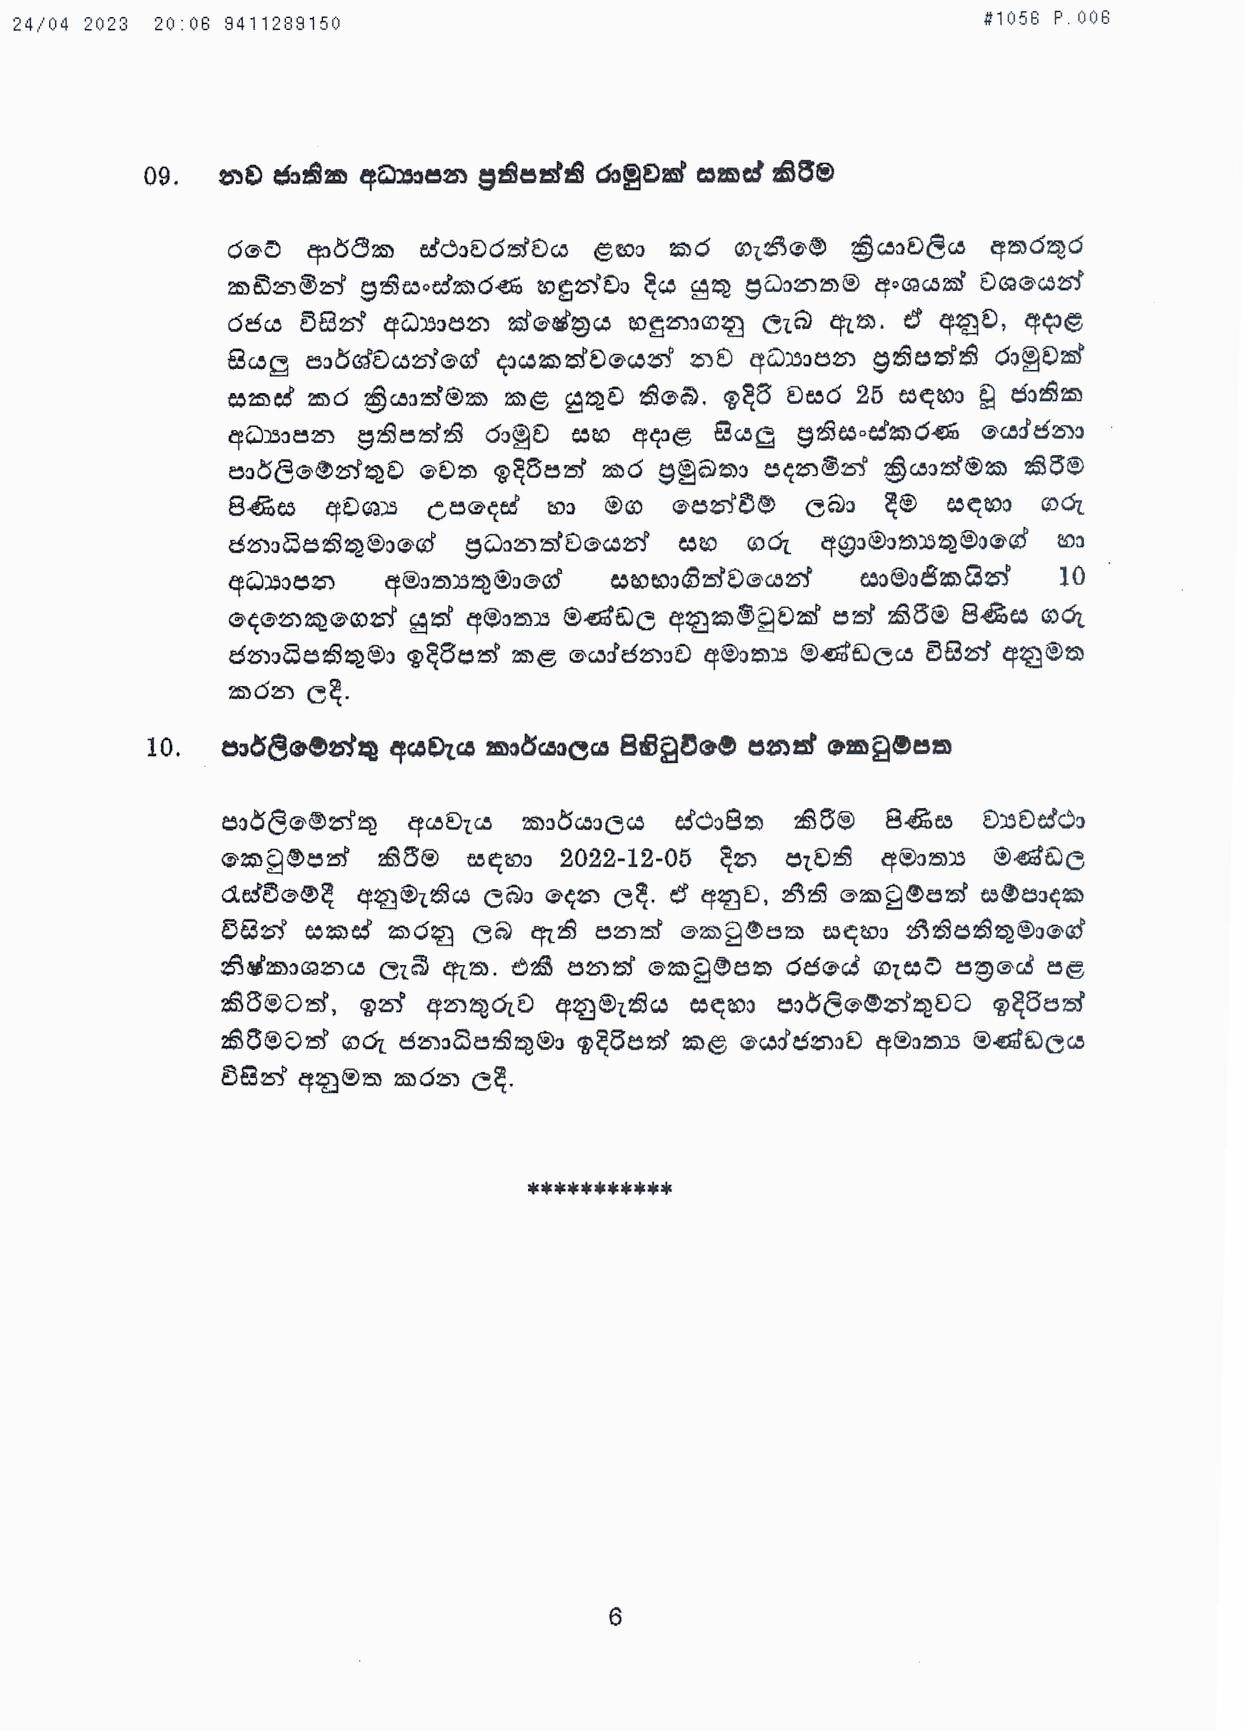 Cabinet Decision 2023.04.24 page 006